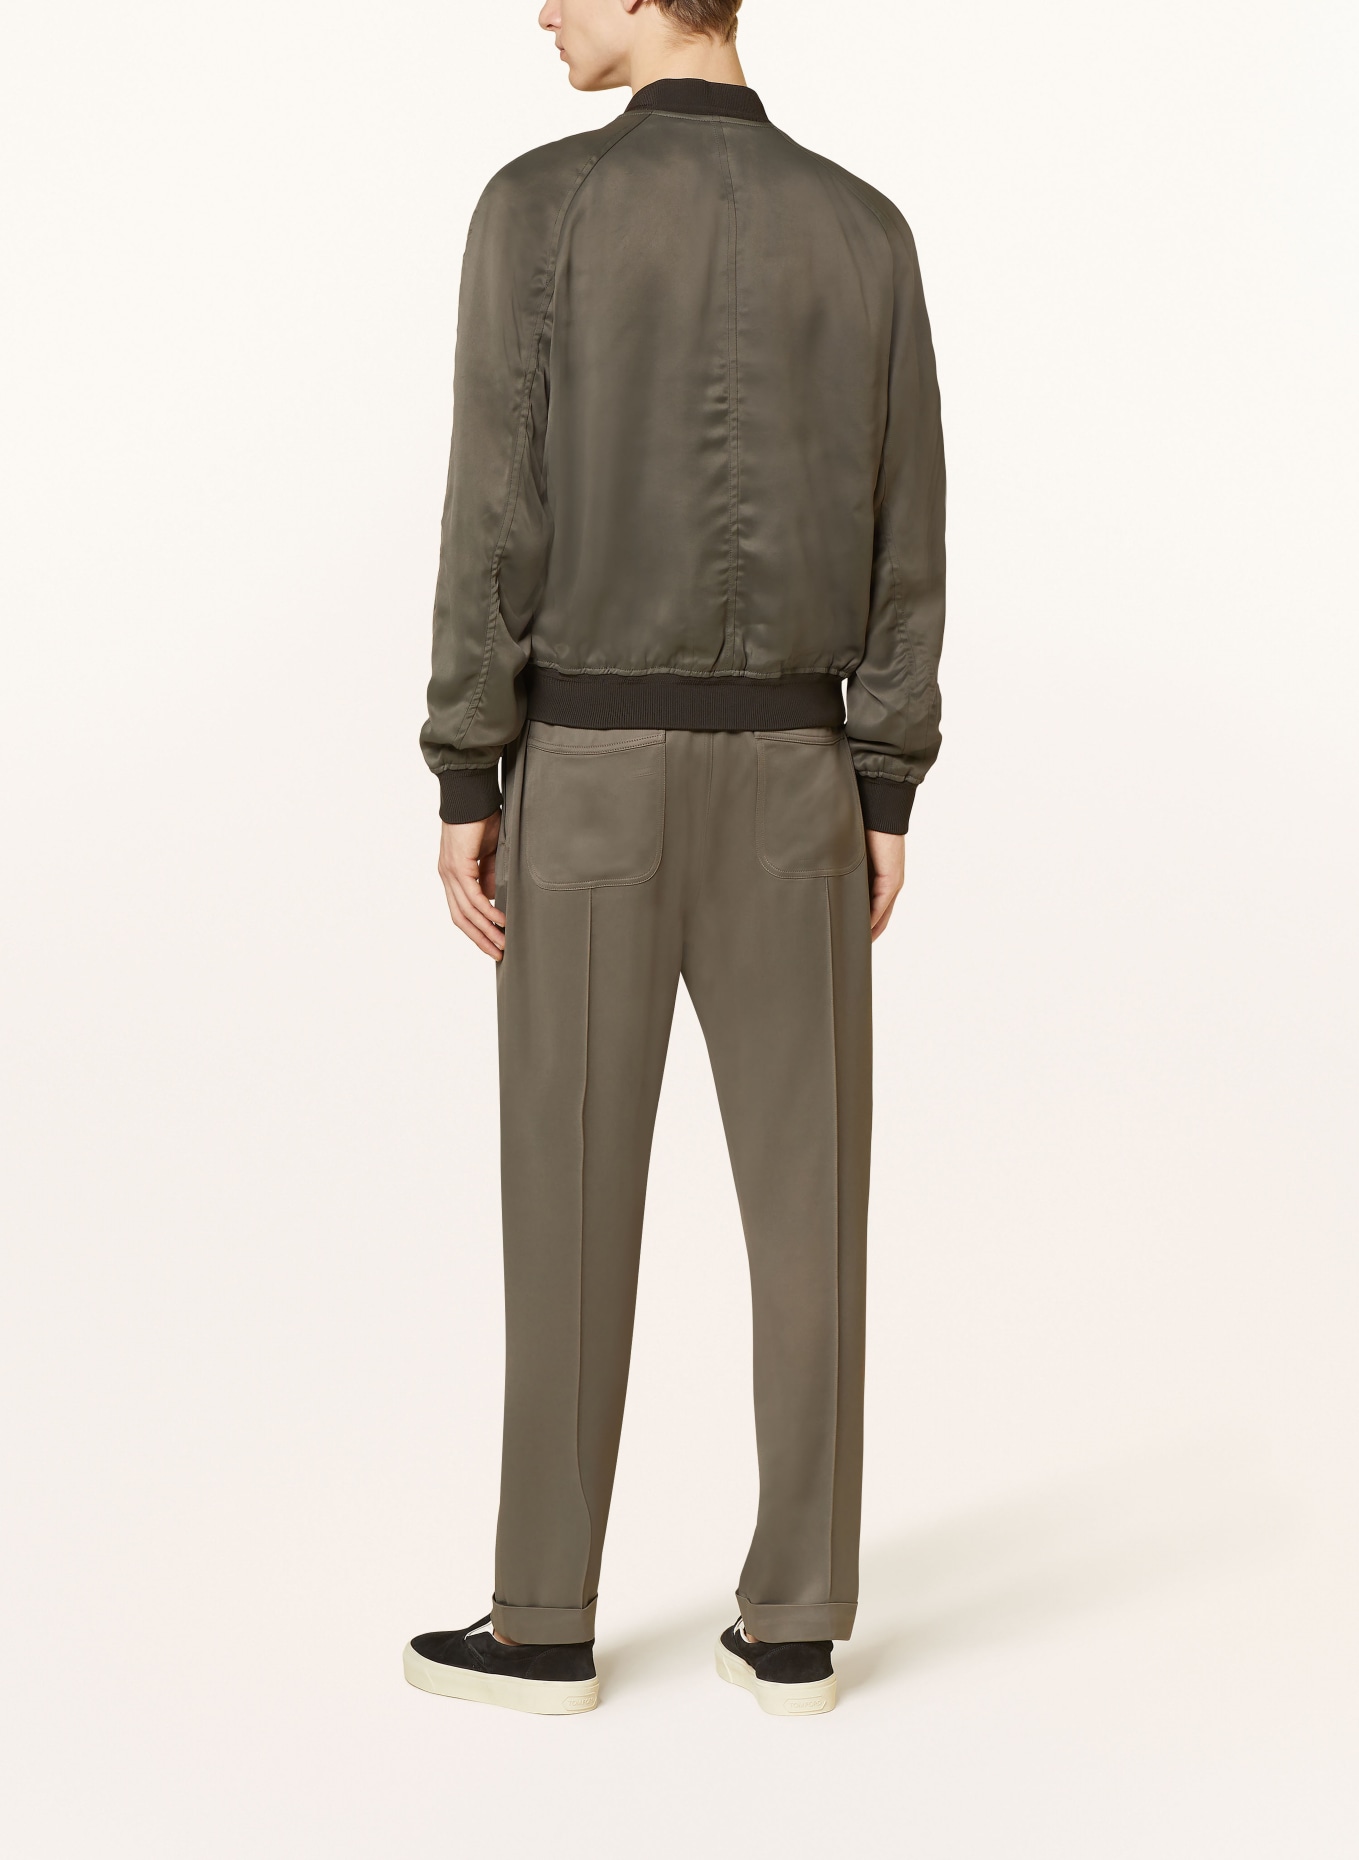 TOM FORD Pants in jogger style slim fit, Color: KHAKI (Image 3)